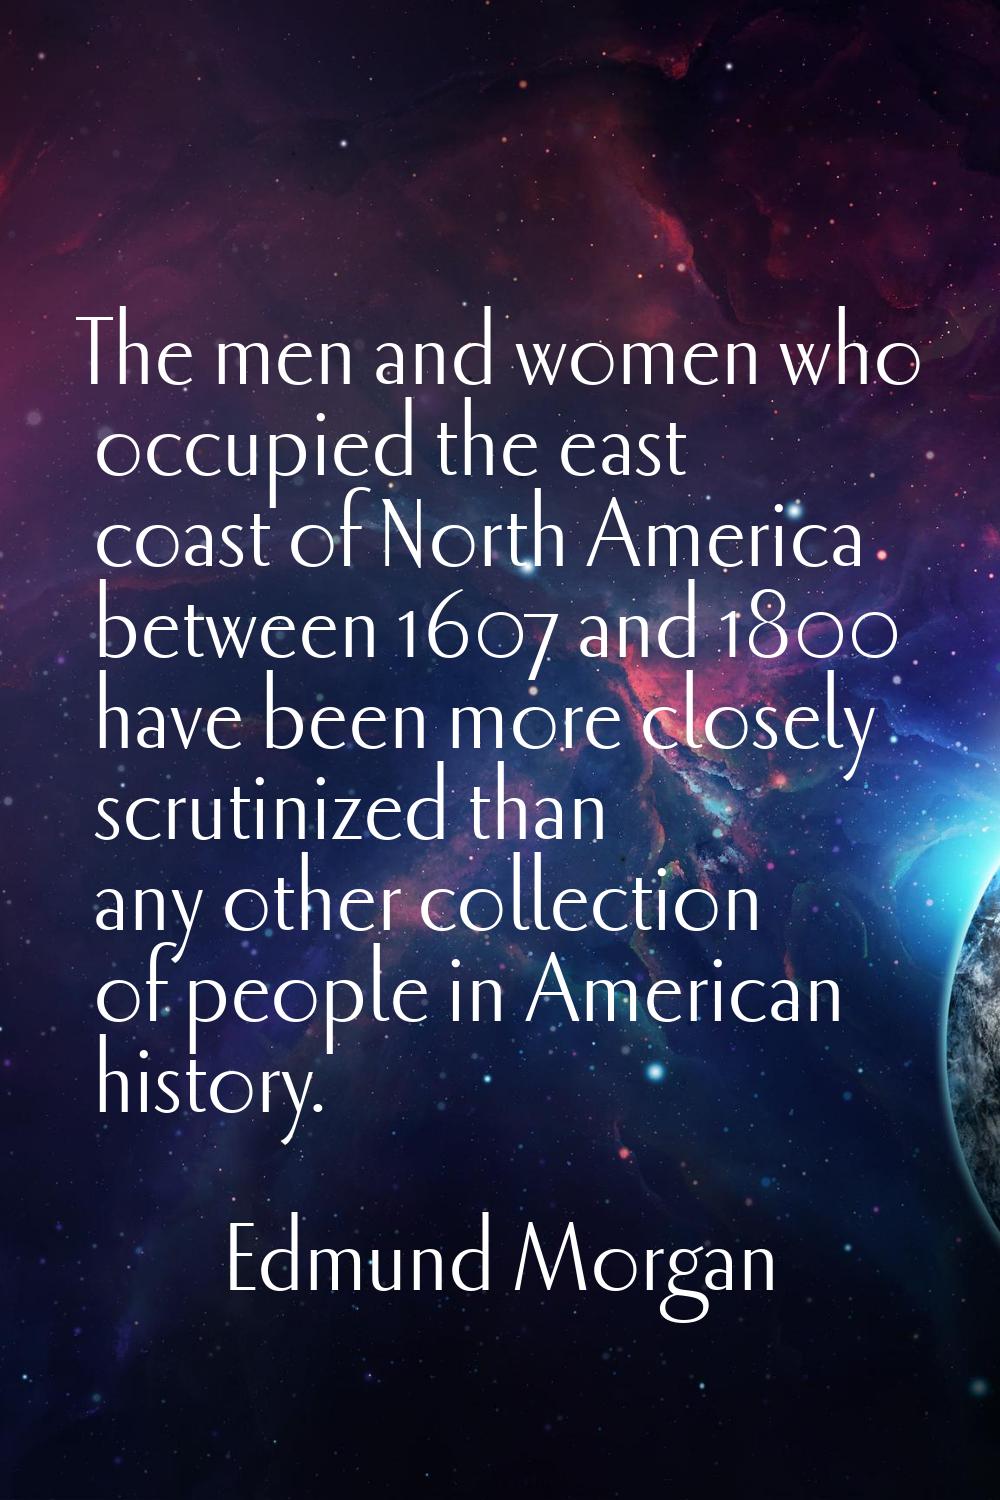 The men and women who occupied the east coast of North America between 1607 and 1800 have been more